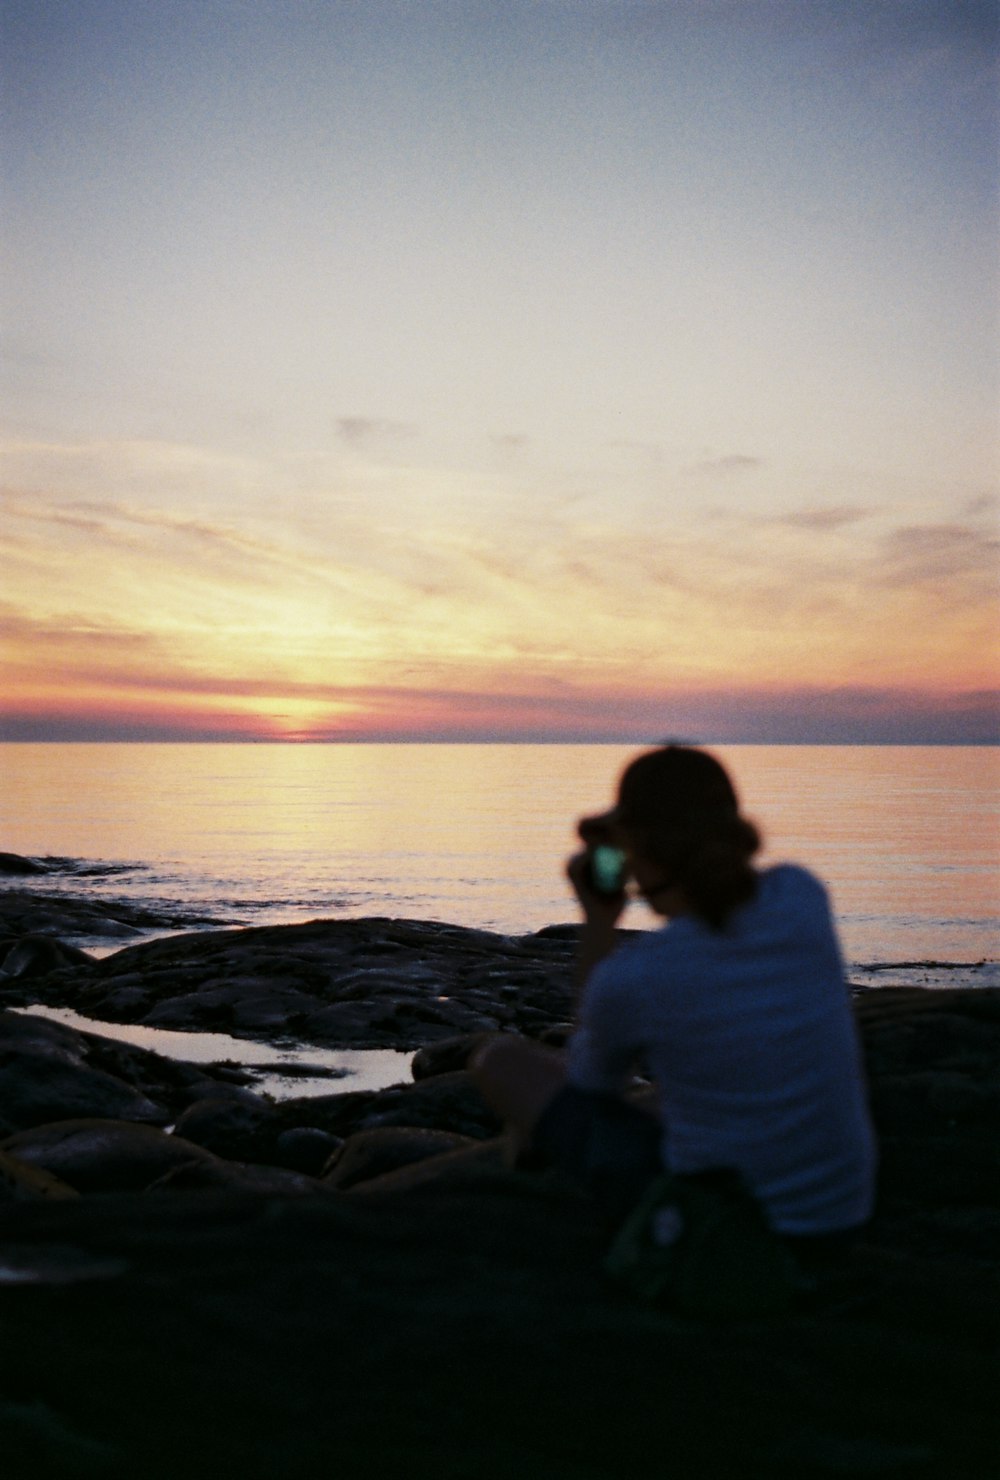 a person sitting on a beach taking a picture of the sunset